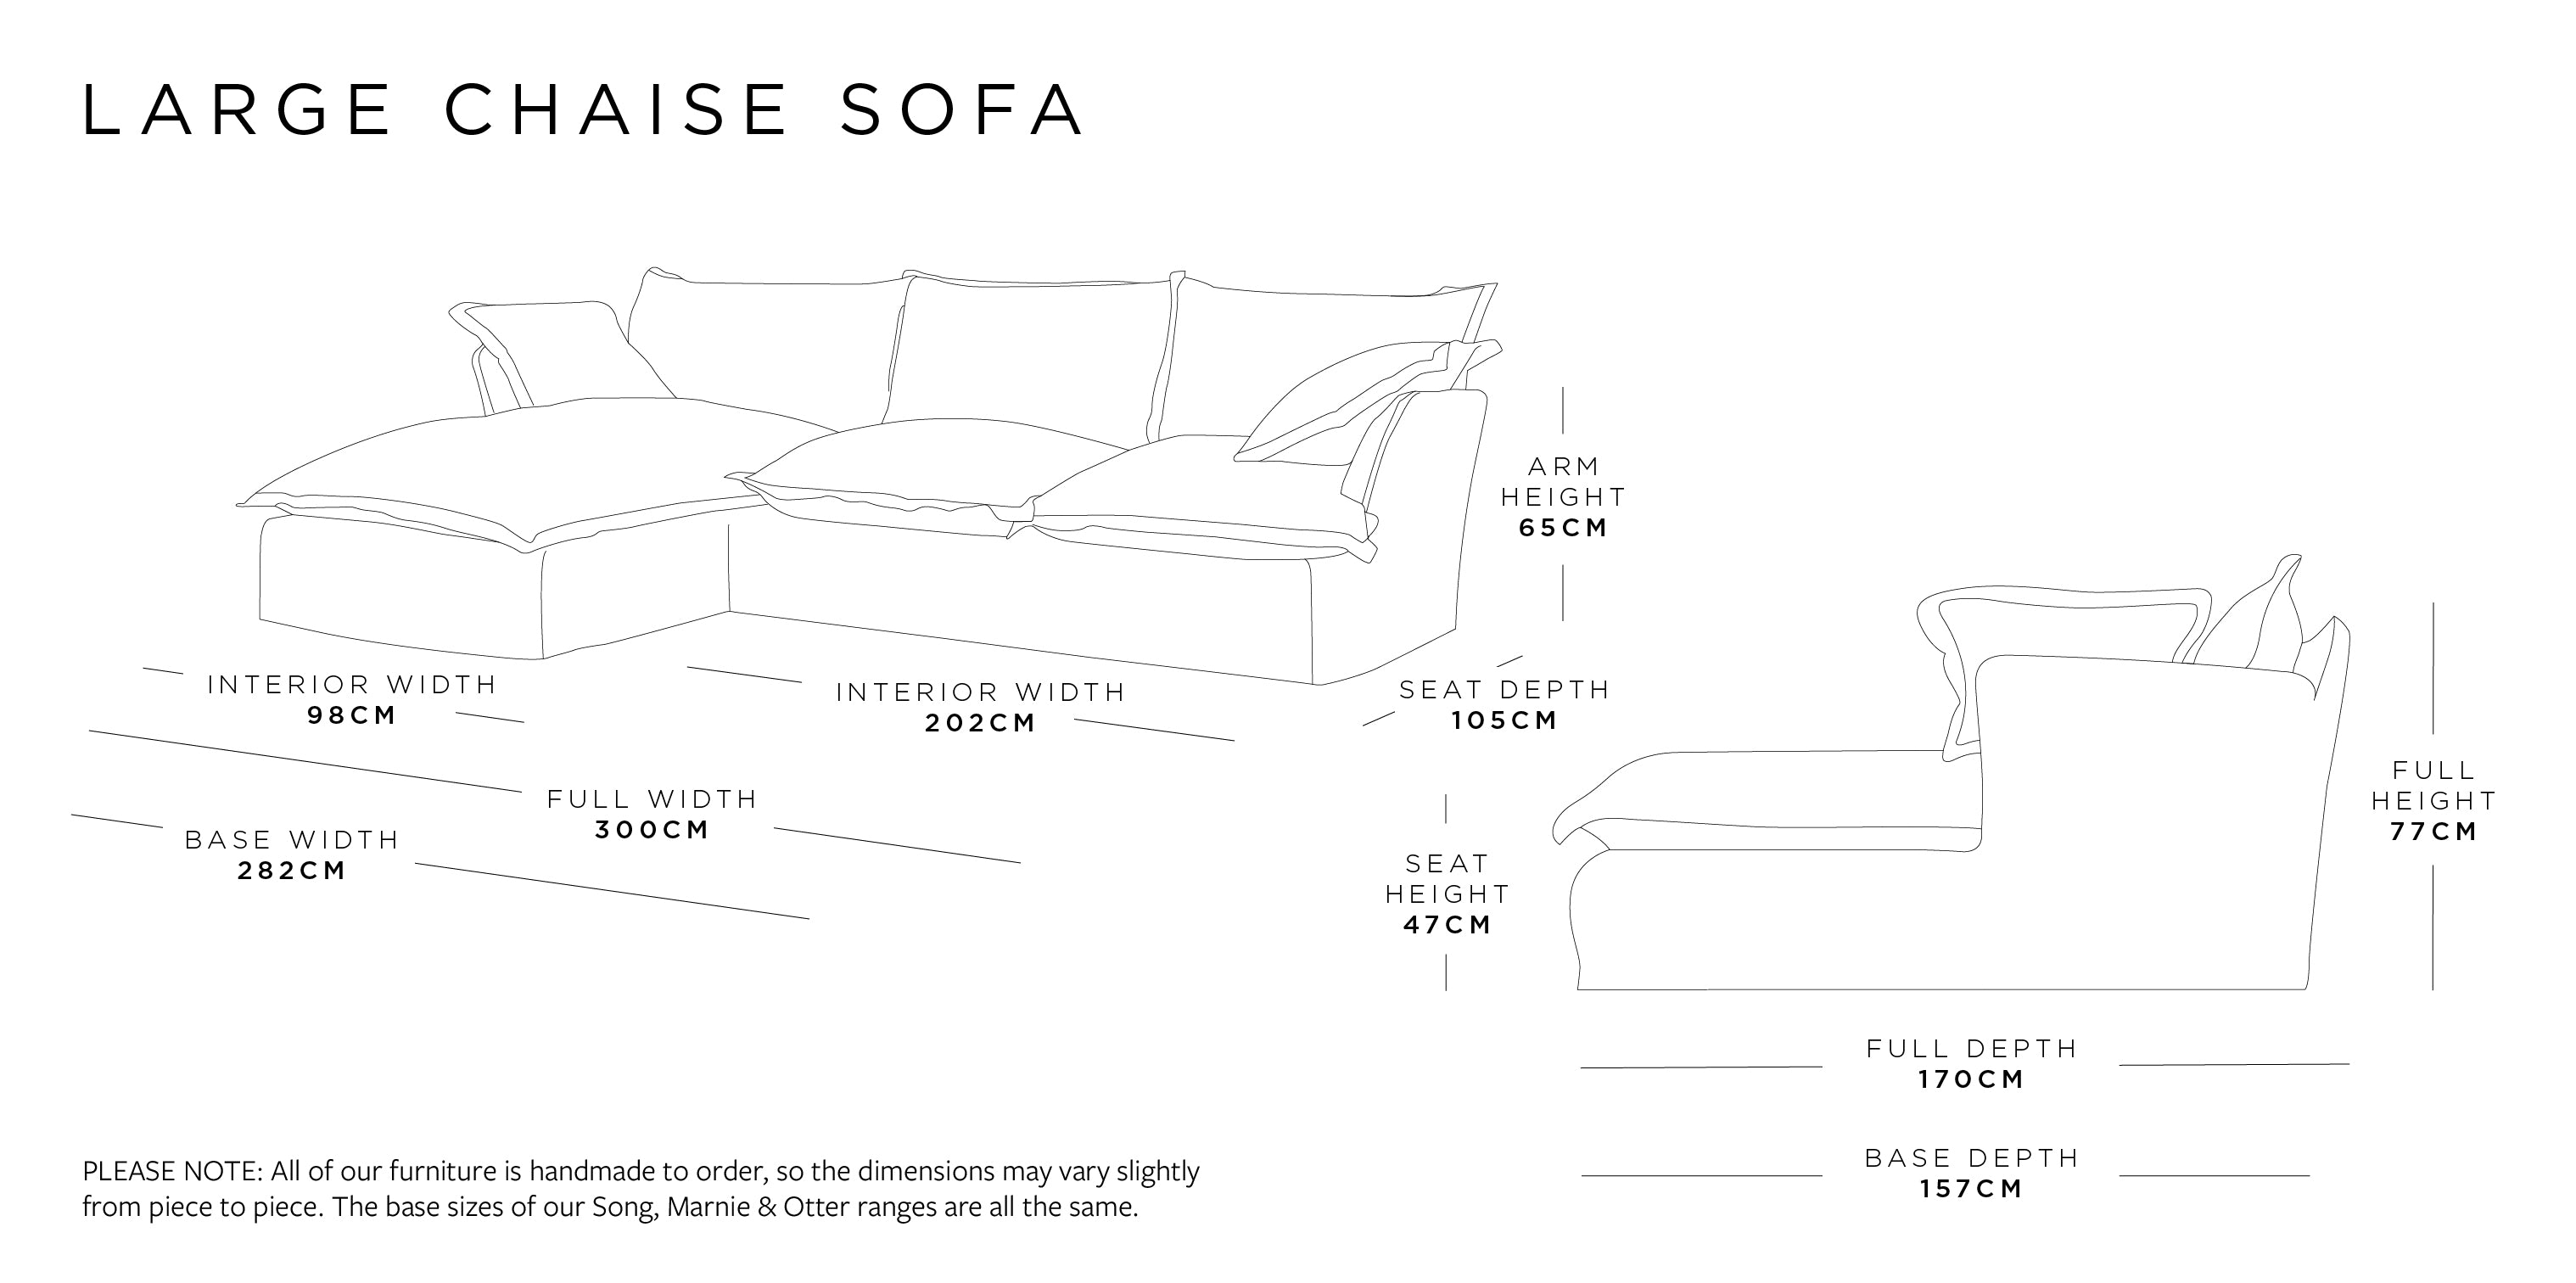 Large Chaise Sofa | Song Range Size Guide